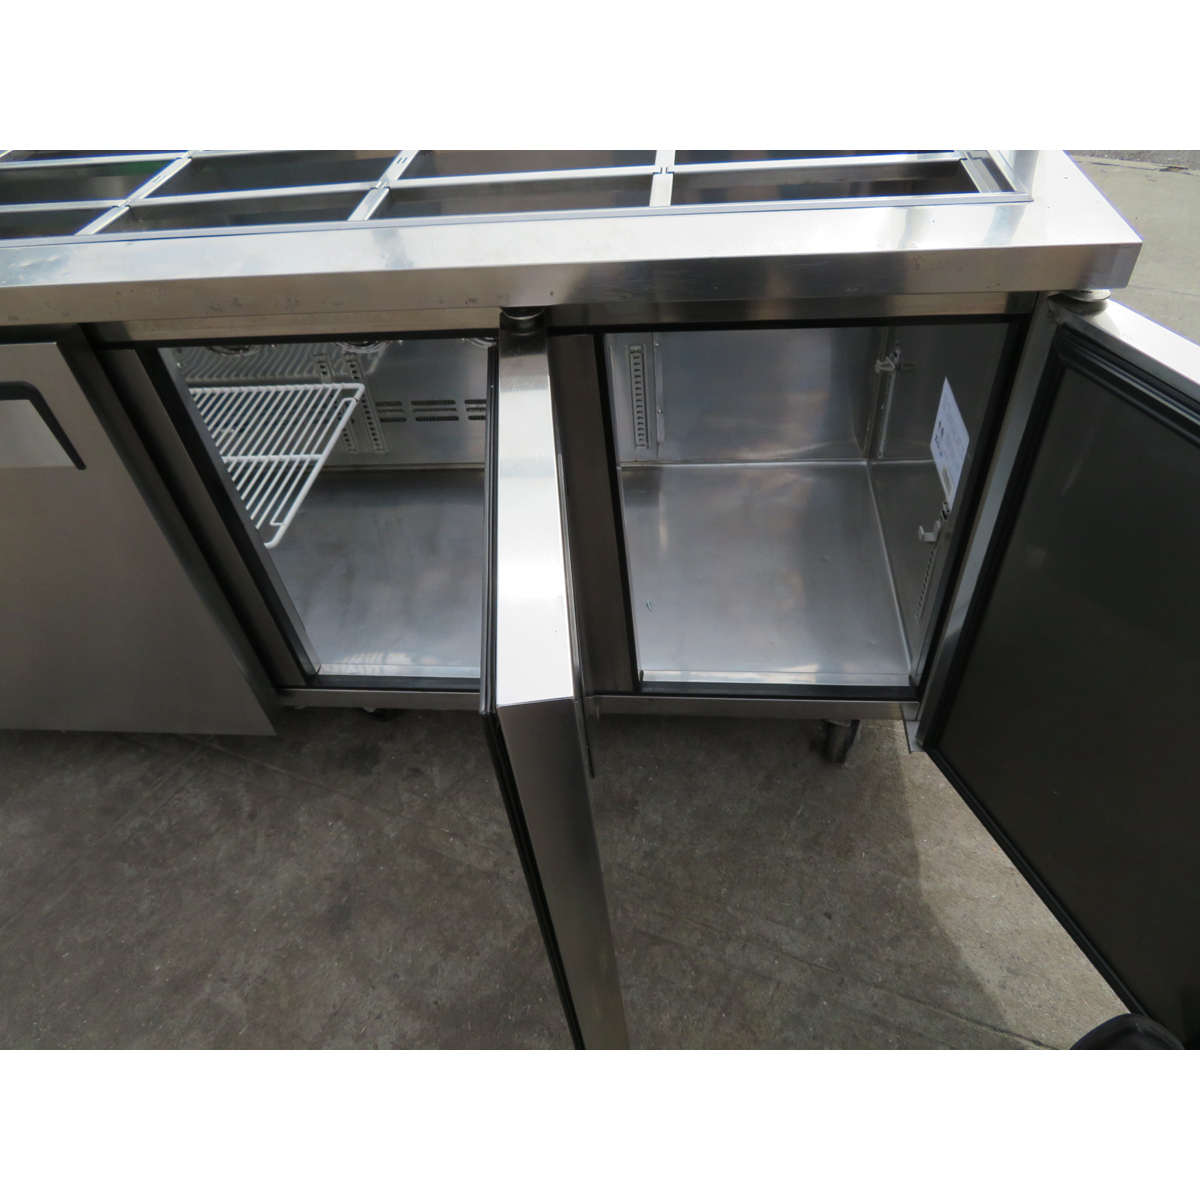 Turbo Air JBT-72 Refrigerated Salad Bar with Custom Enclosed Sneeze Guard, Used Great Condition image 3